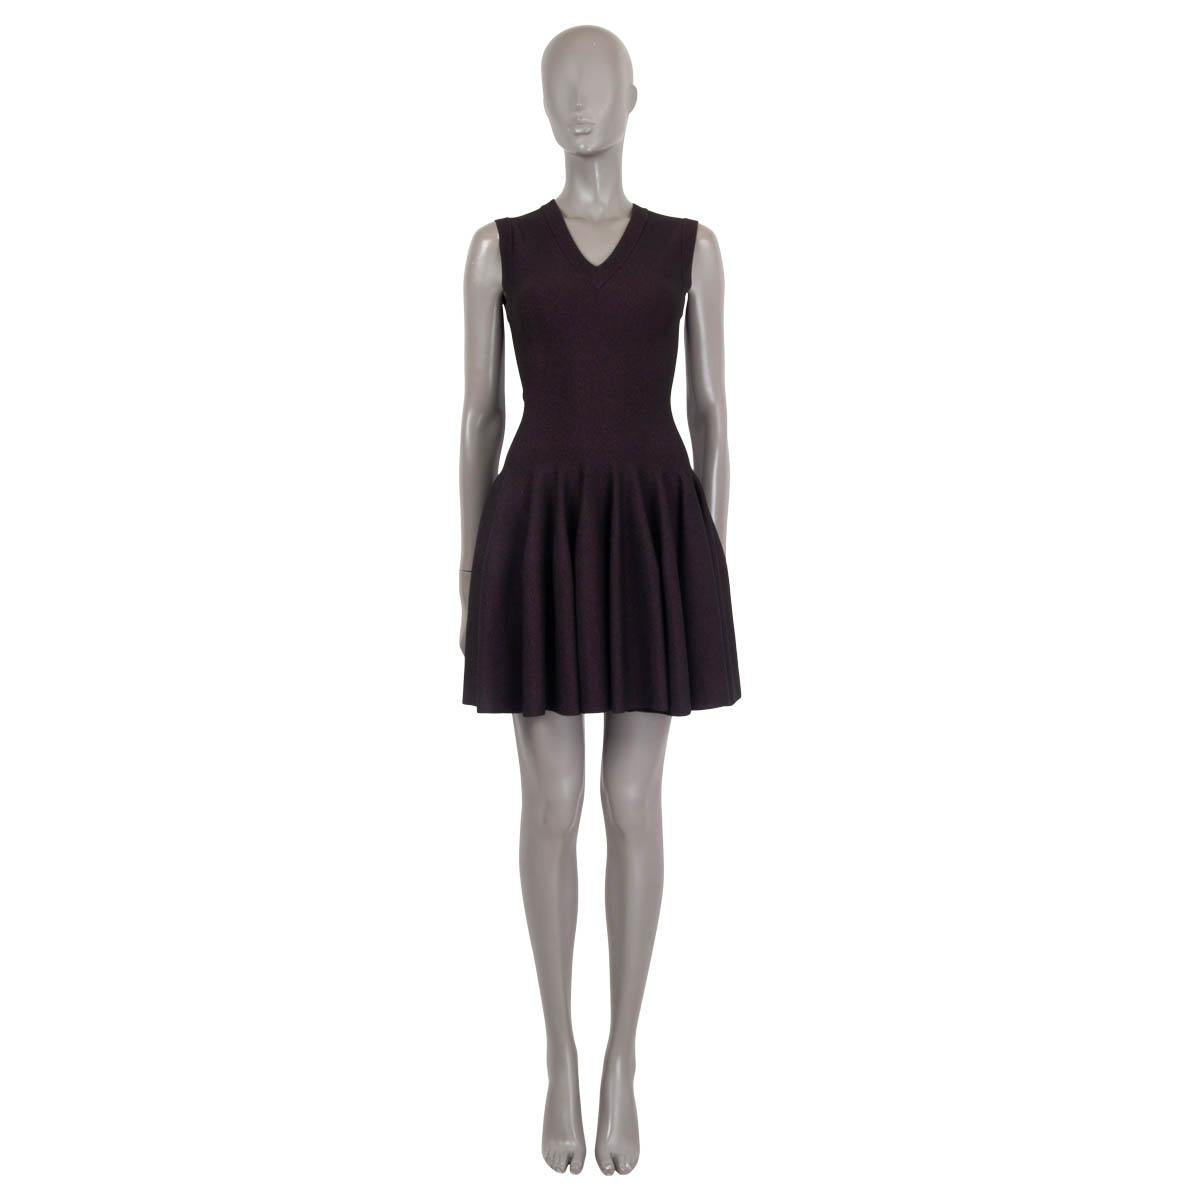 100% authentic Alaïa sleeveless flared lurex knit dress in black and purpel viscose (75%), polyester (15%) and polyamide (10%). Features a v-neck. Opens with a zipper on the back. Has been worn and is in excellent condition. 

Measurements
Tag